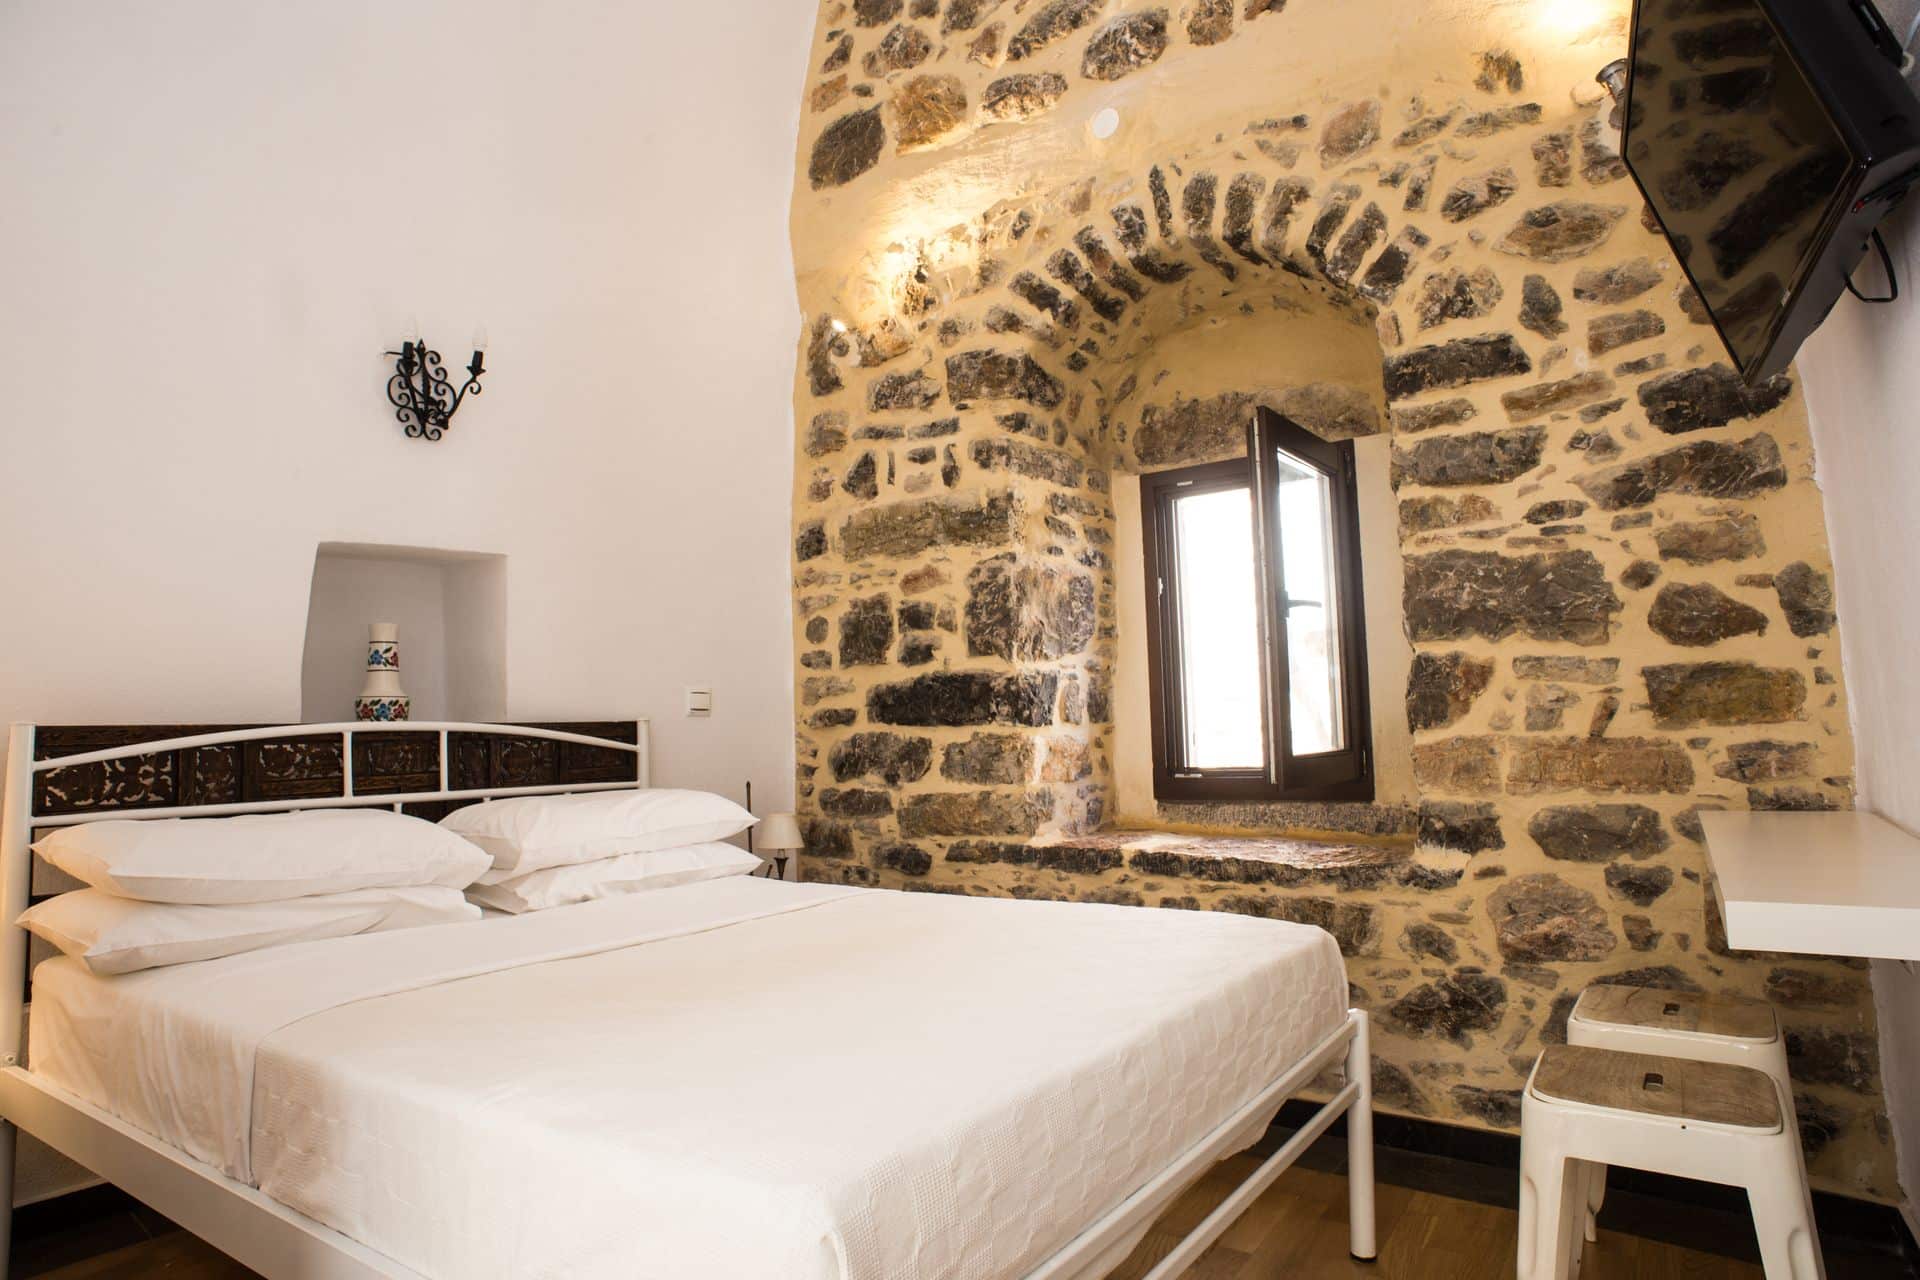 Affordable stay in Mesta Chios. Lida Mary